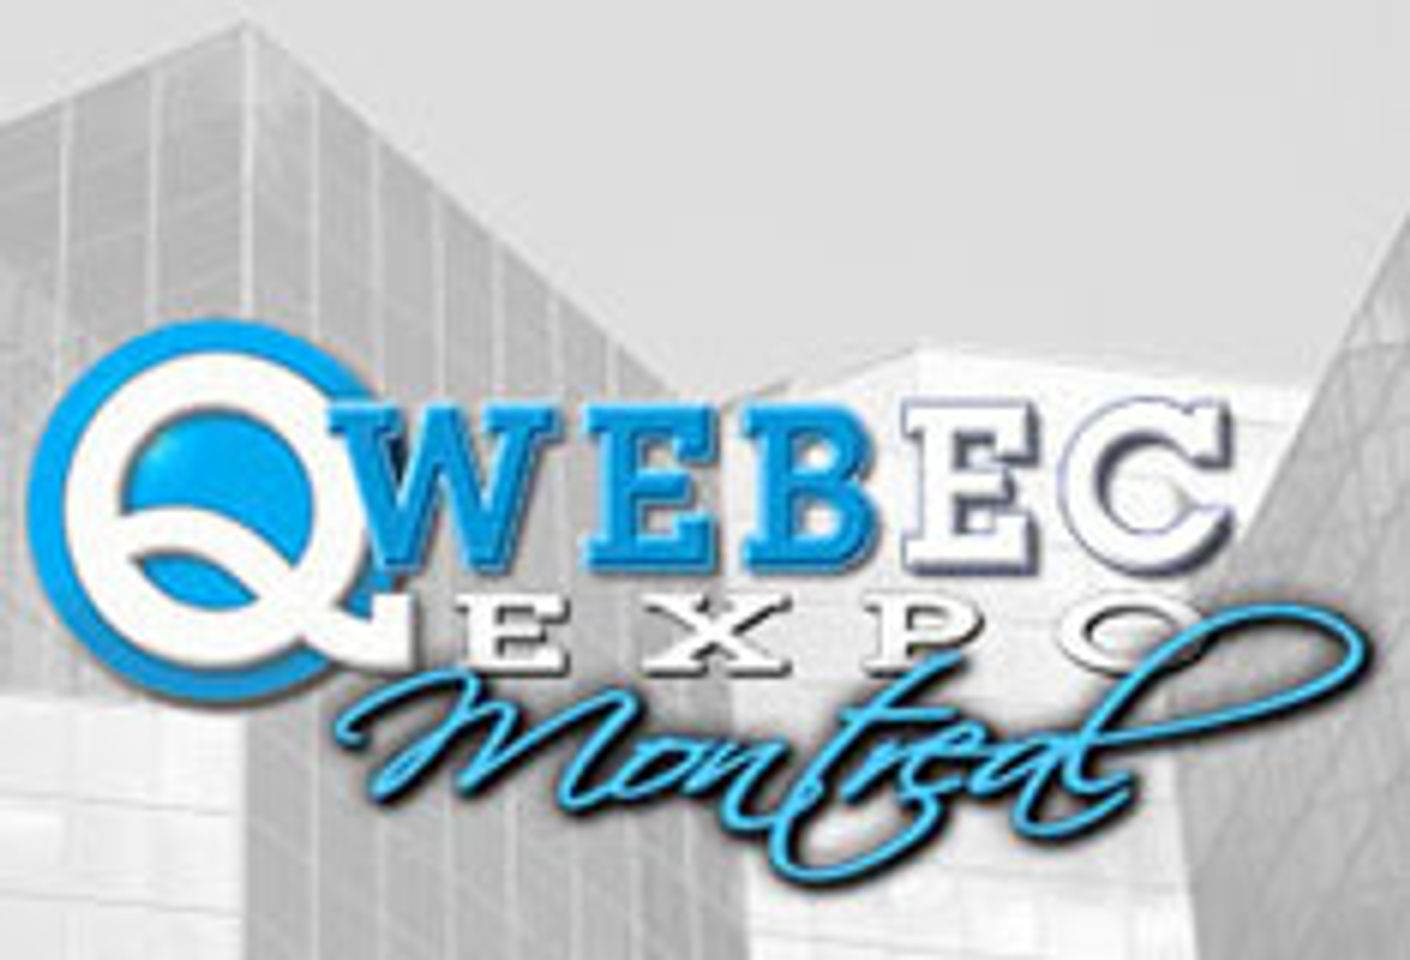 Qwebec 2016 Secures Hotel For Show